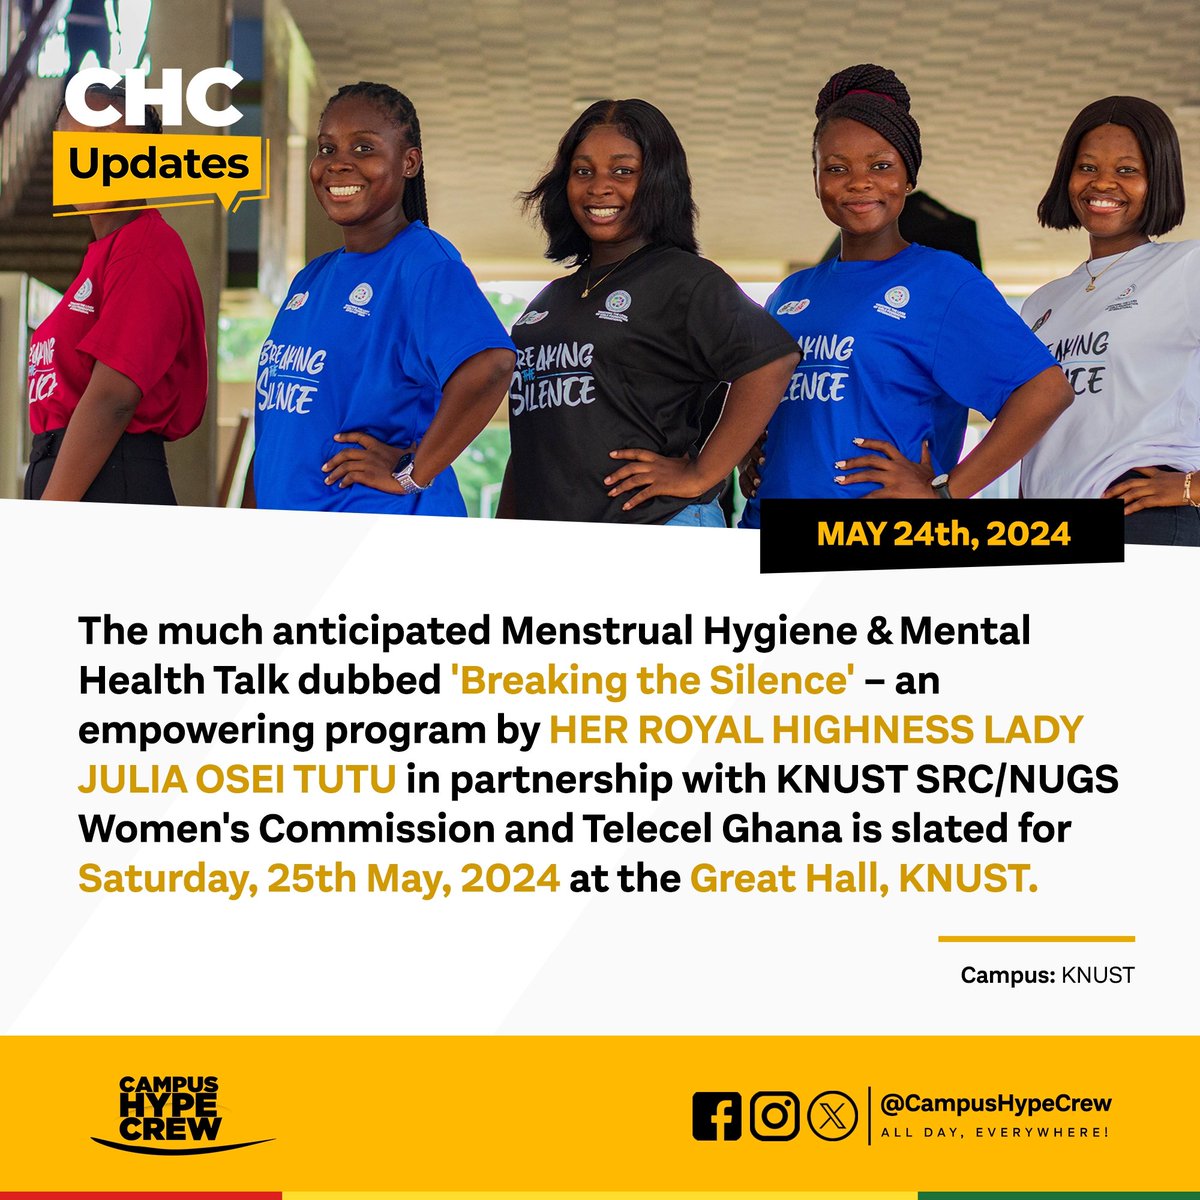 KNUST, are you ready? All roads lead to the Great Hall TOMORROW; 'Let's Break the Silence'.

It's the much anticipated Menstrual Hygiene & Mental Health Talk. Don't miss out!

#BreakingTheSilence | #CHCUpdate🇬🇭